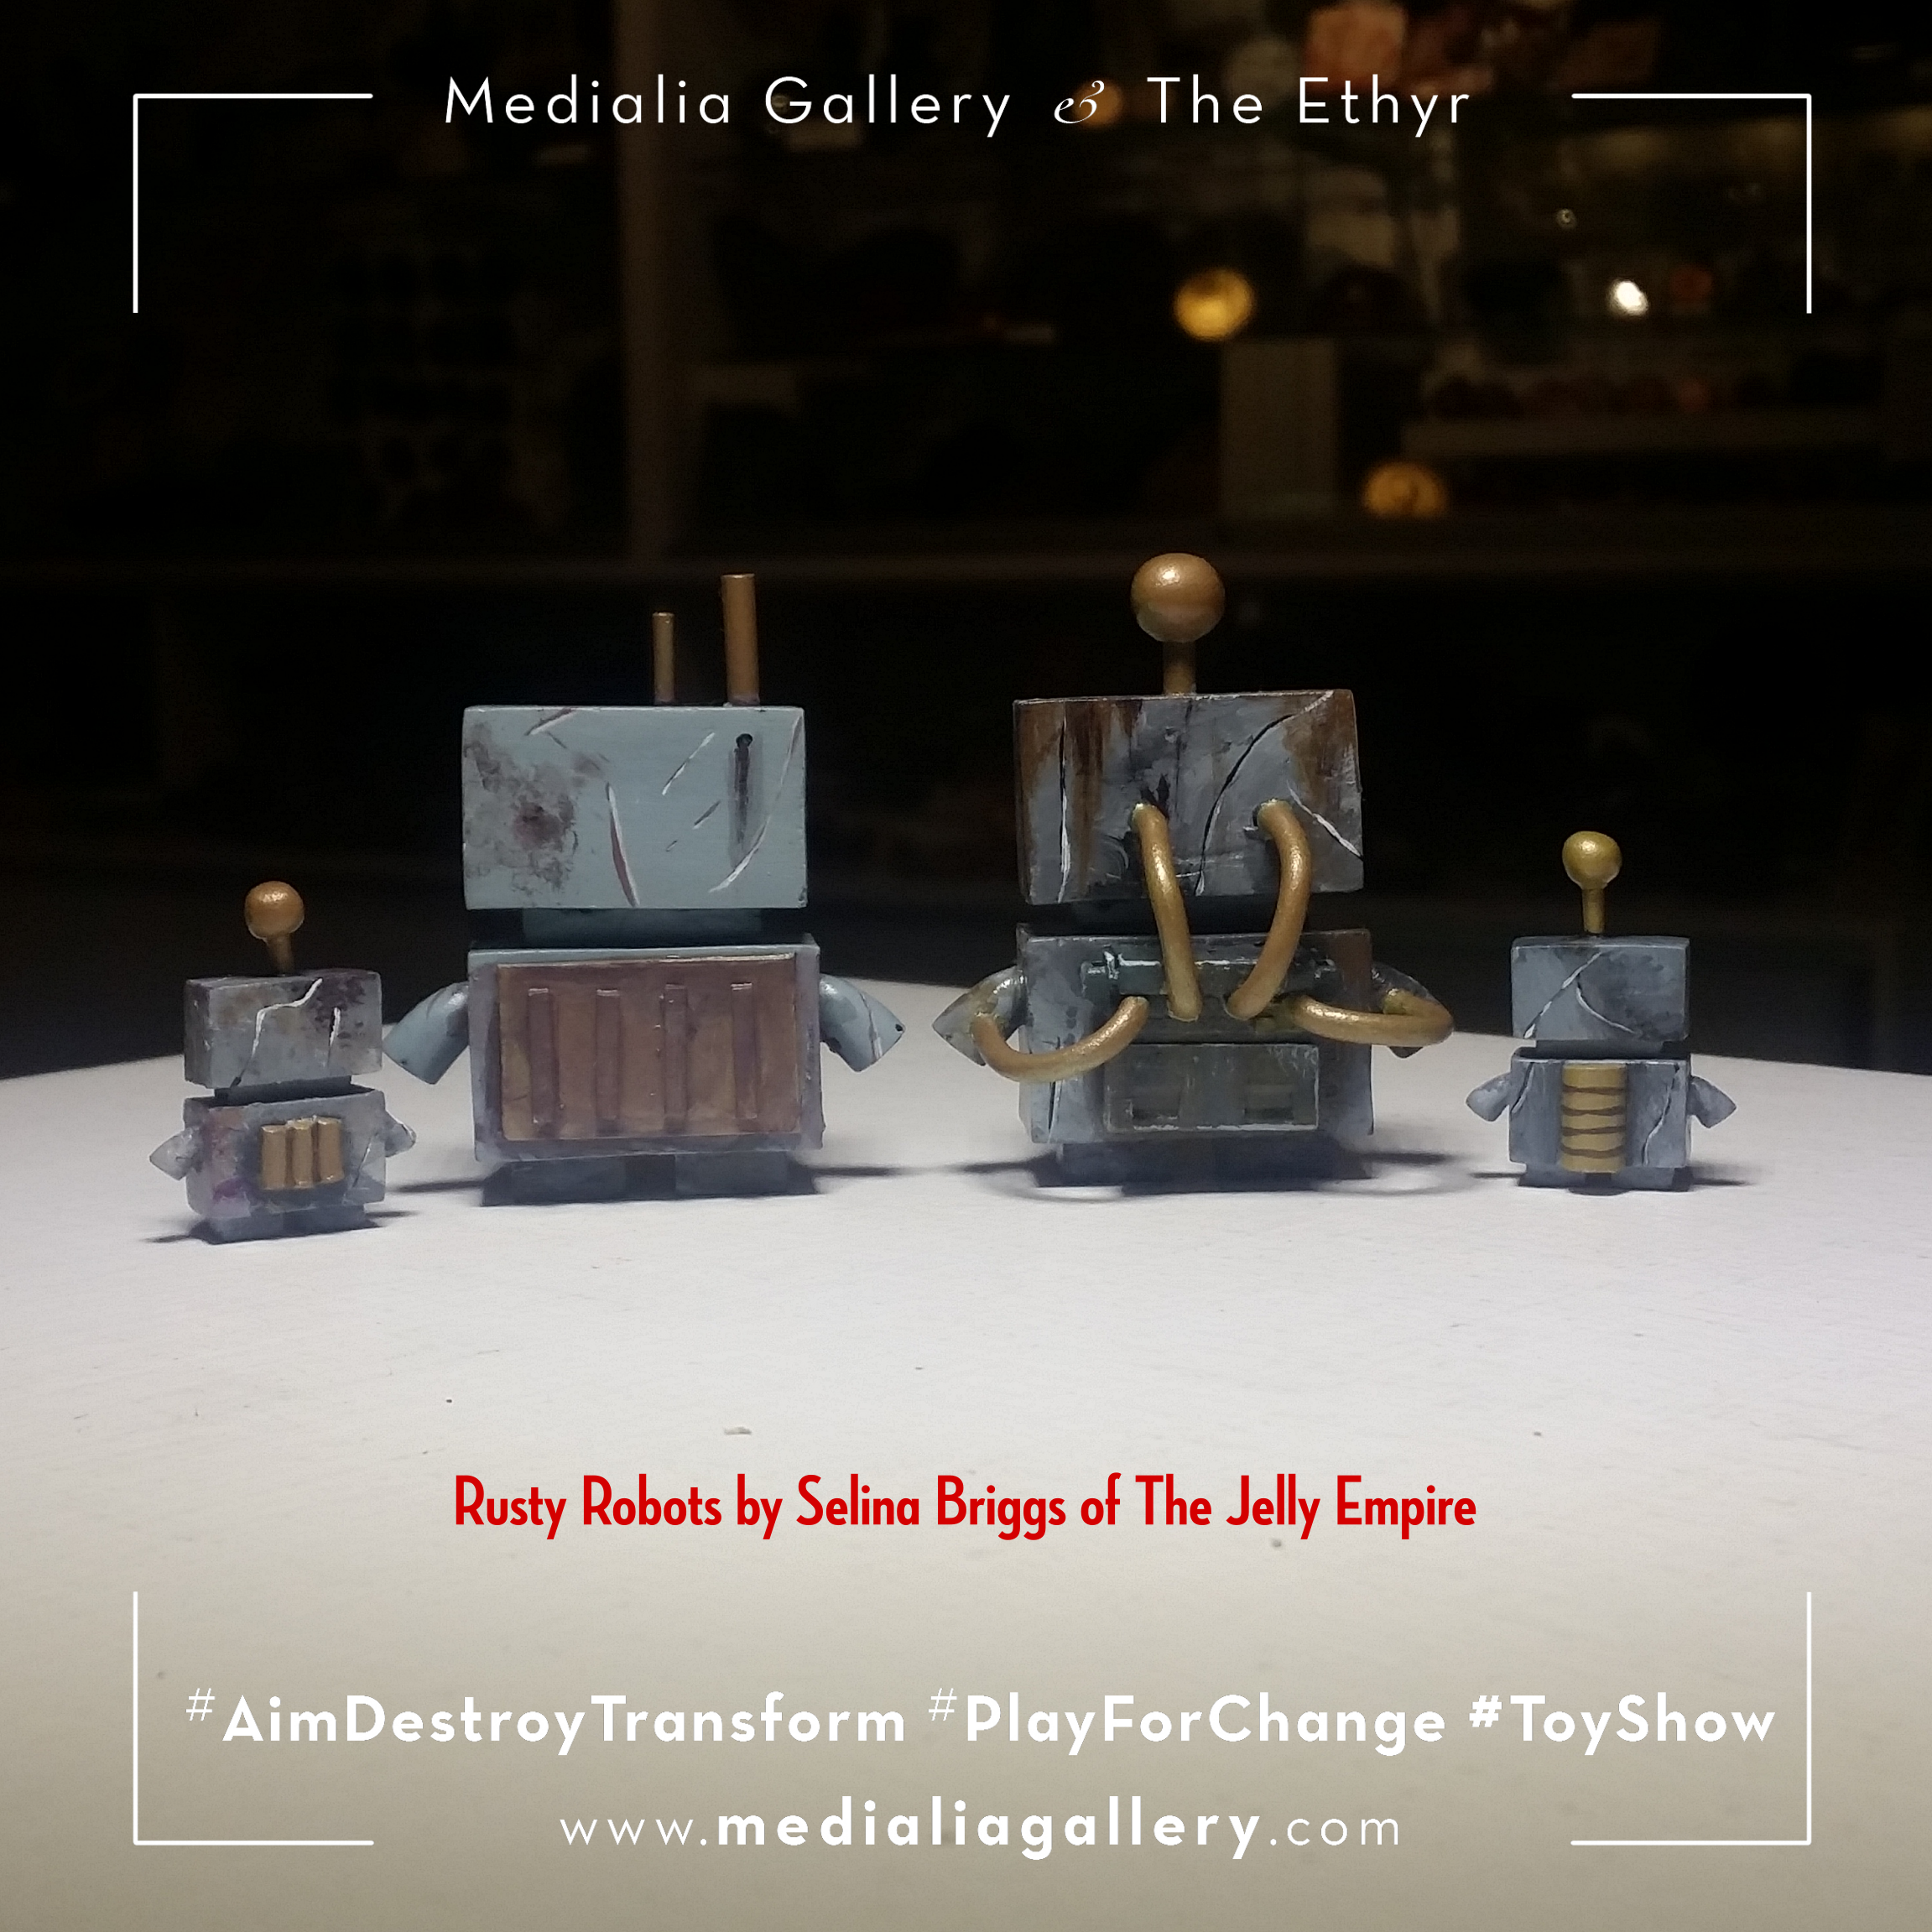 MedialiaGallery_The_Ethyr_AimDestroyTransform_Toy_Show_announcement_The_Jelly_Empire_Robots_Selina_Briggs_VI_November_2017.jpg.png